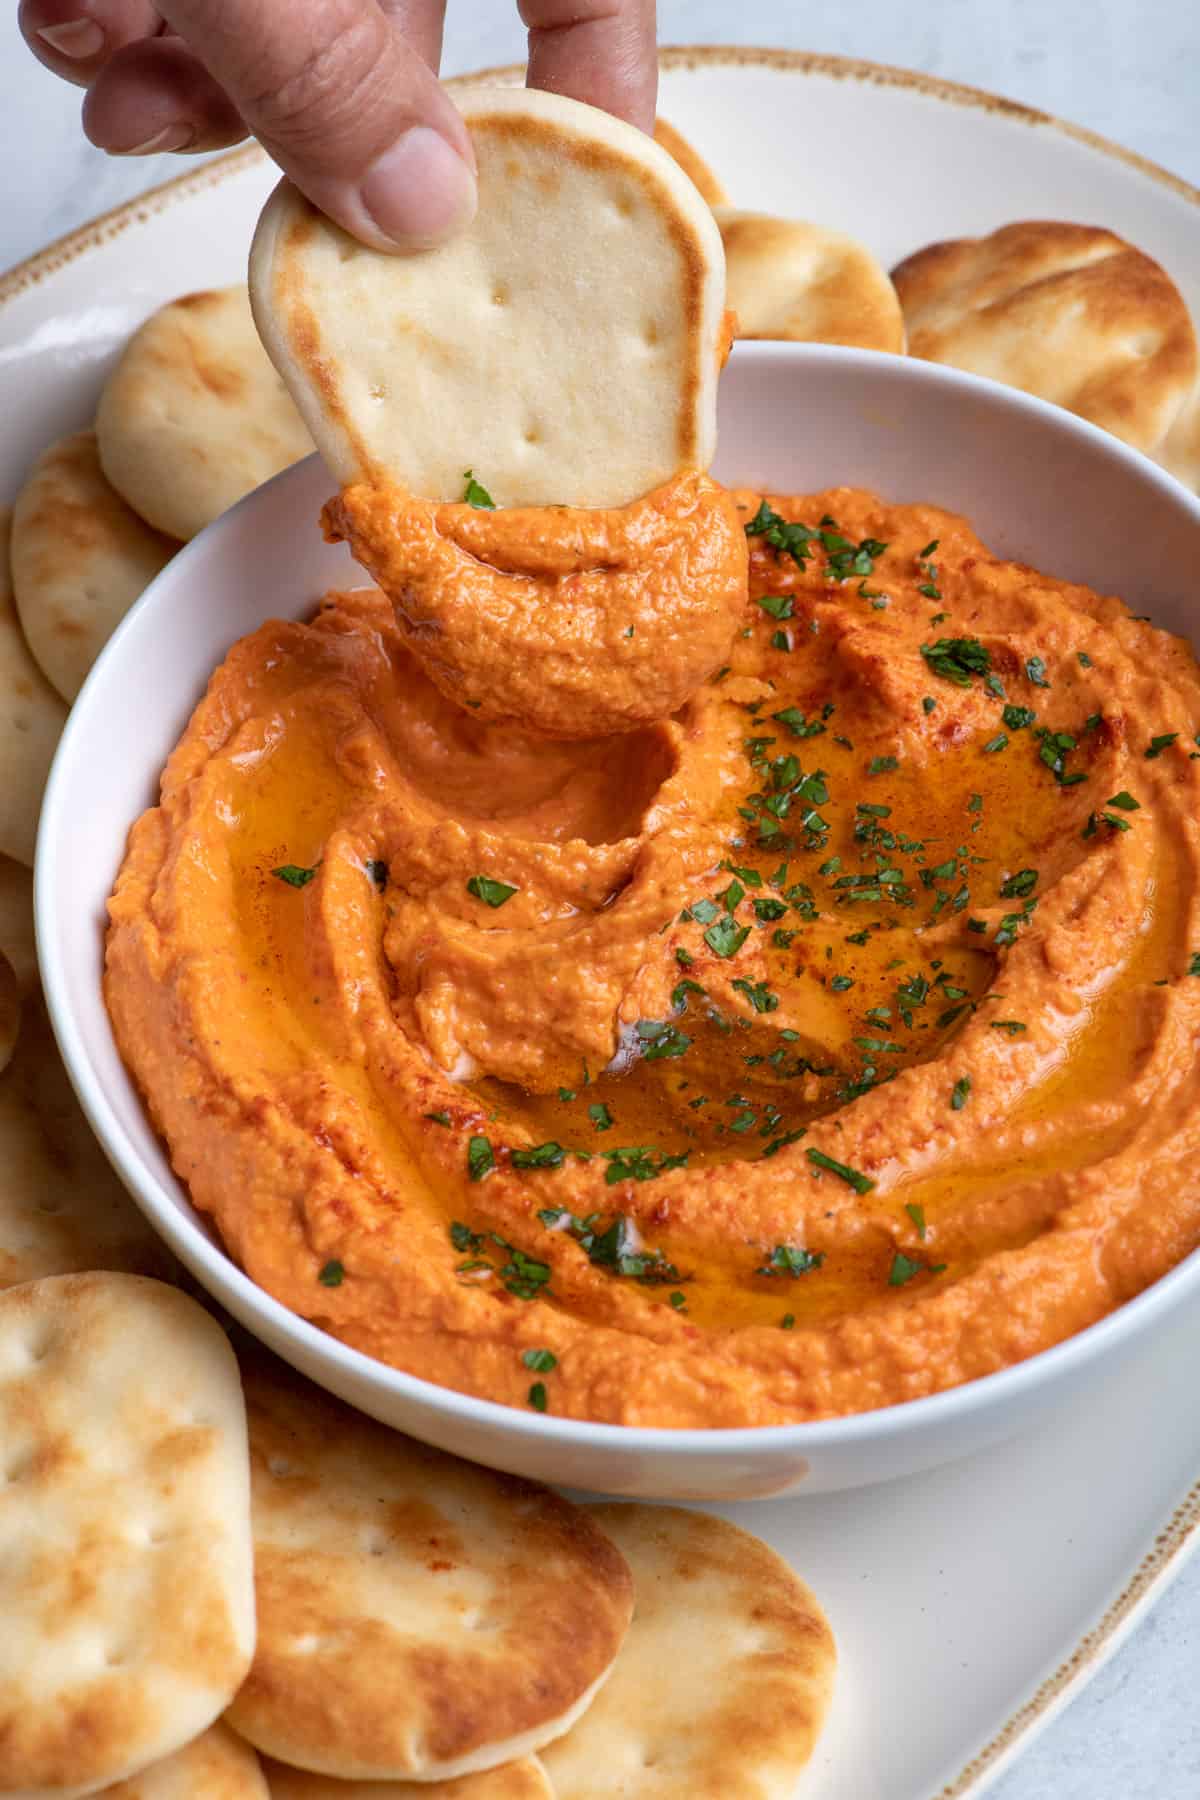 Naan bread dipping into roasted red pepper hummus